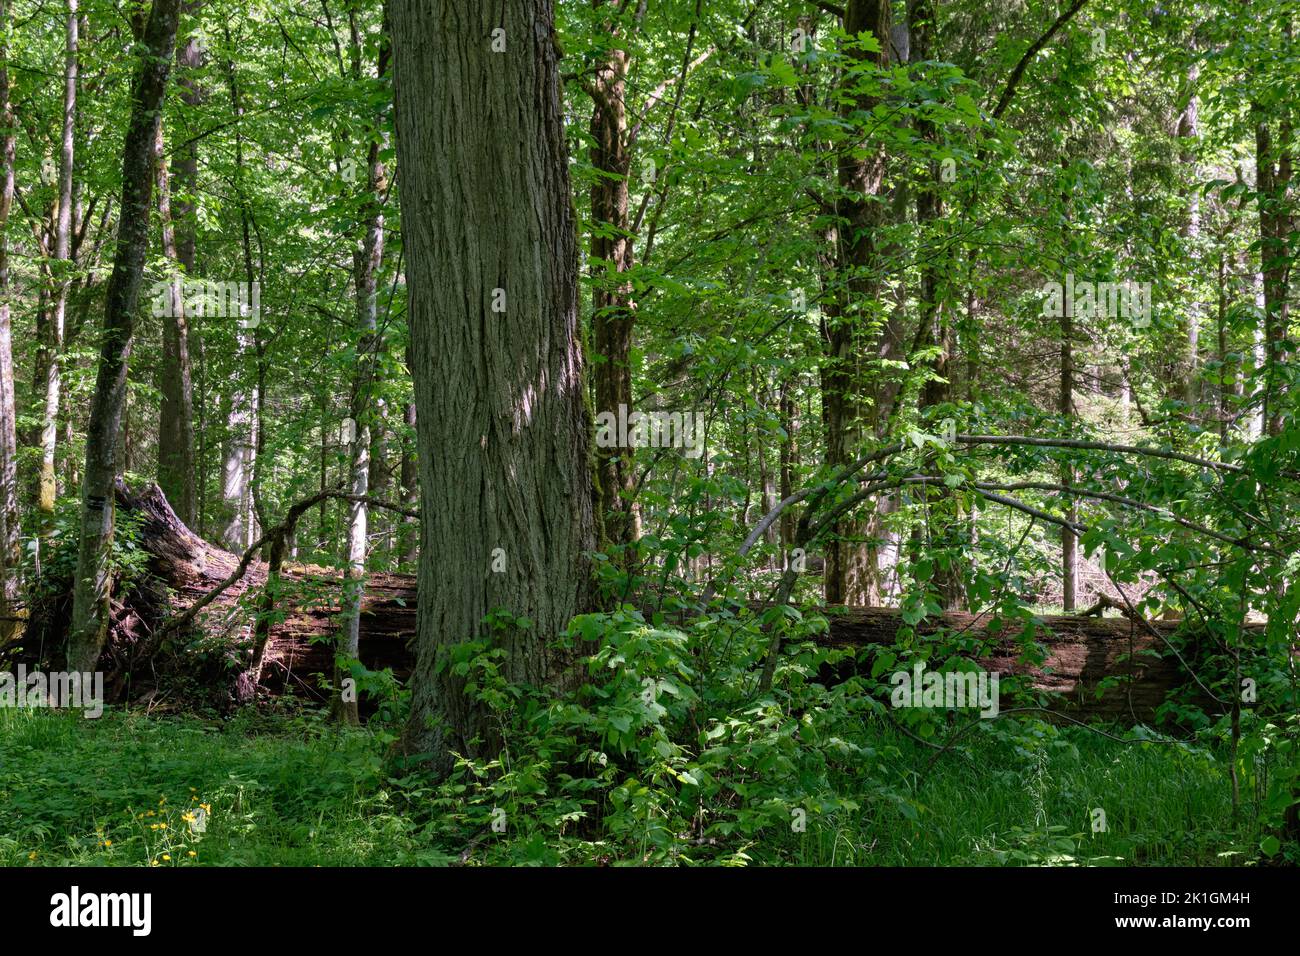 Oak and hornbeam tree deciduous forest in spring with broken oak tree and linden tree next to in foreground, Bialowieza Forest, Poland, Europe Stock Photo